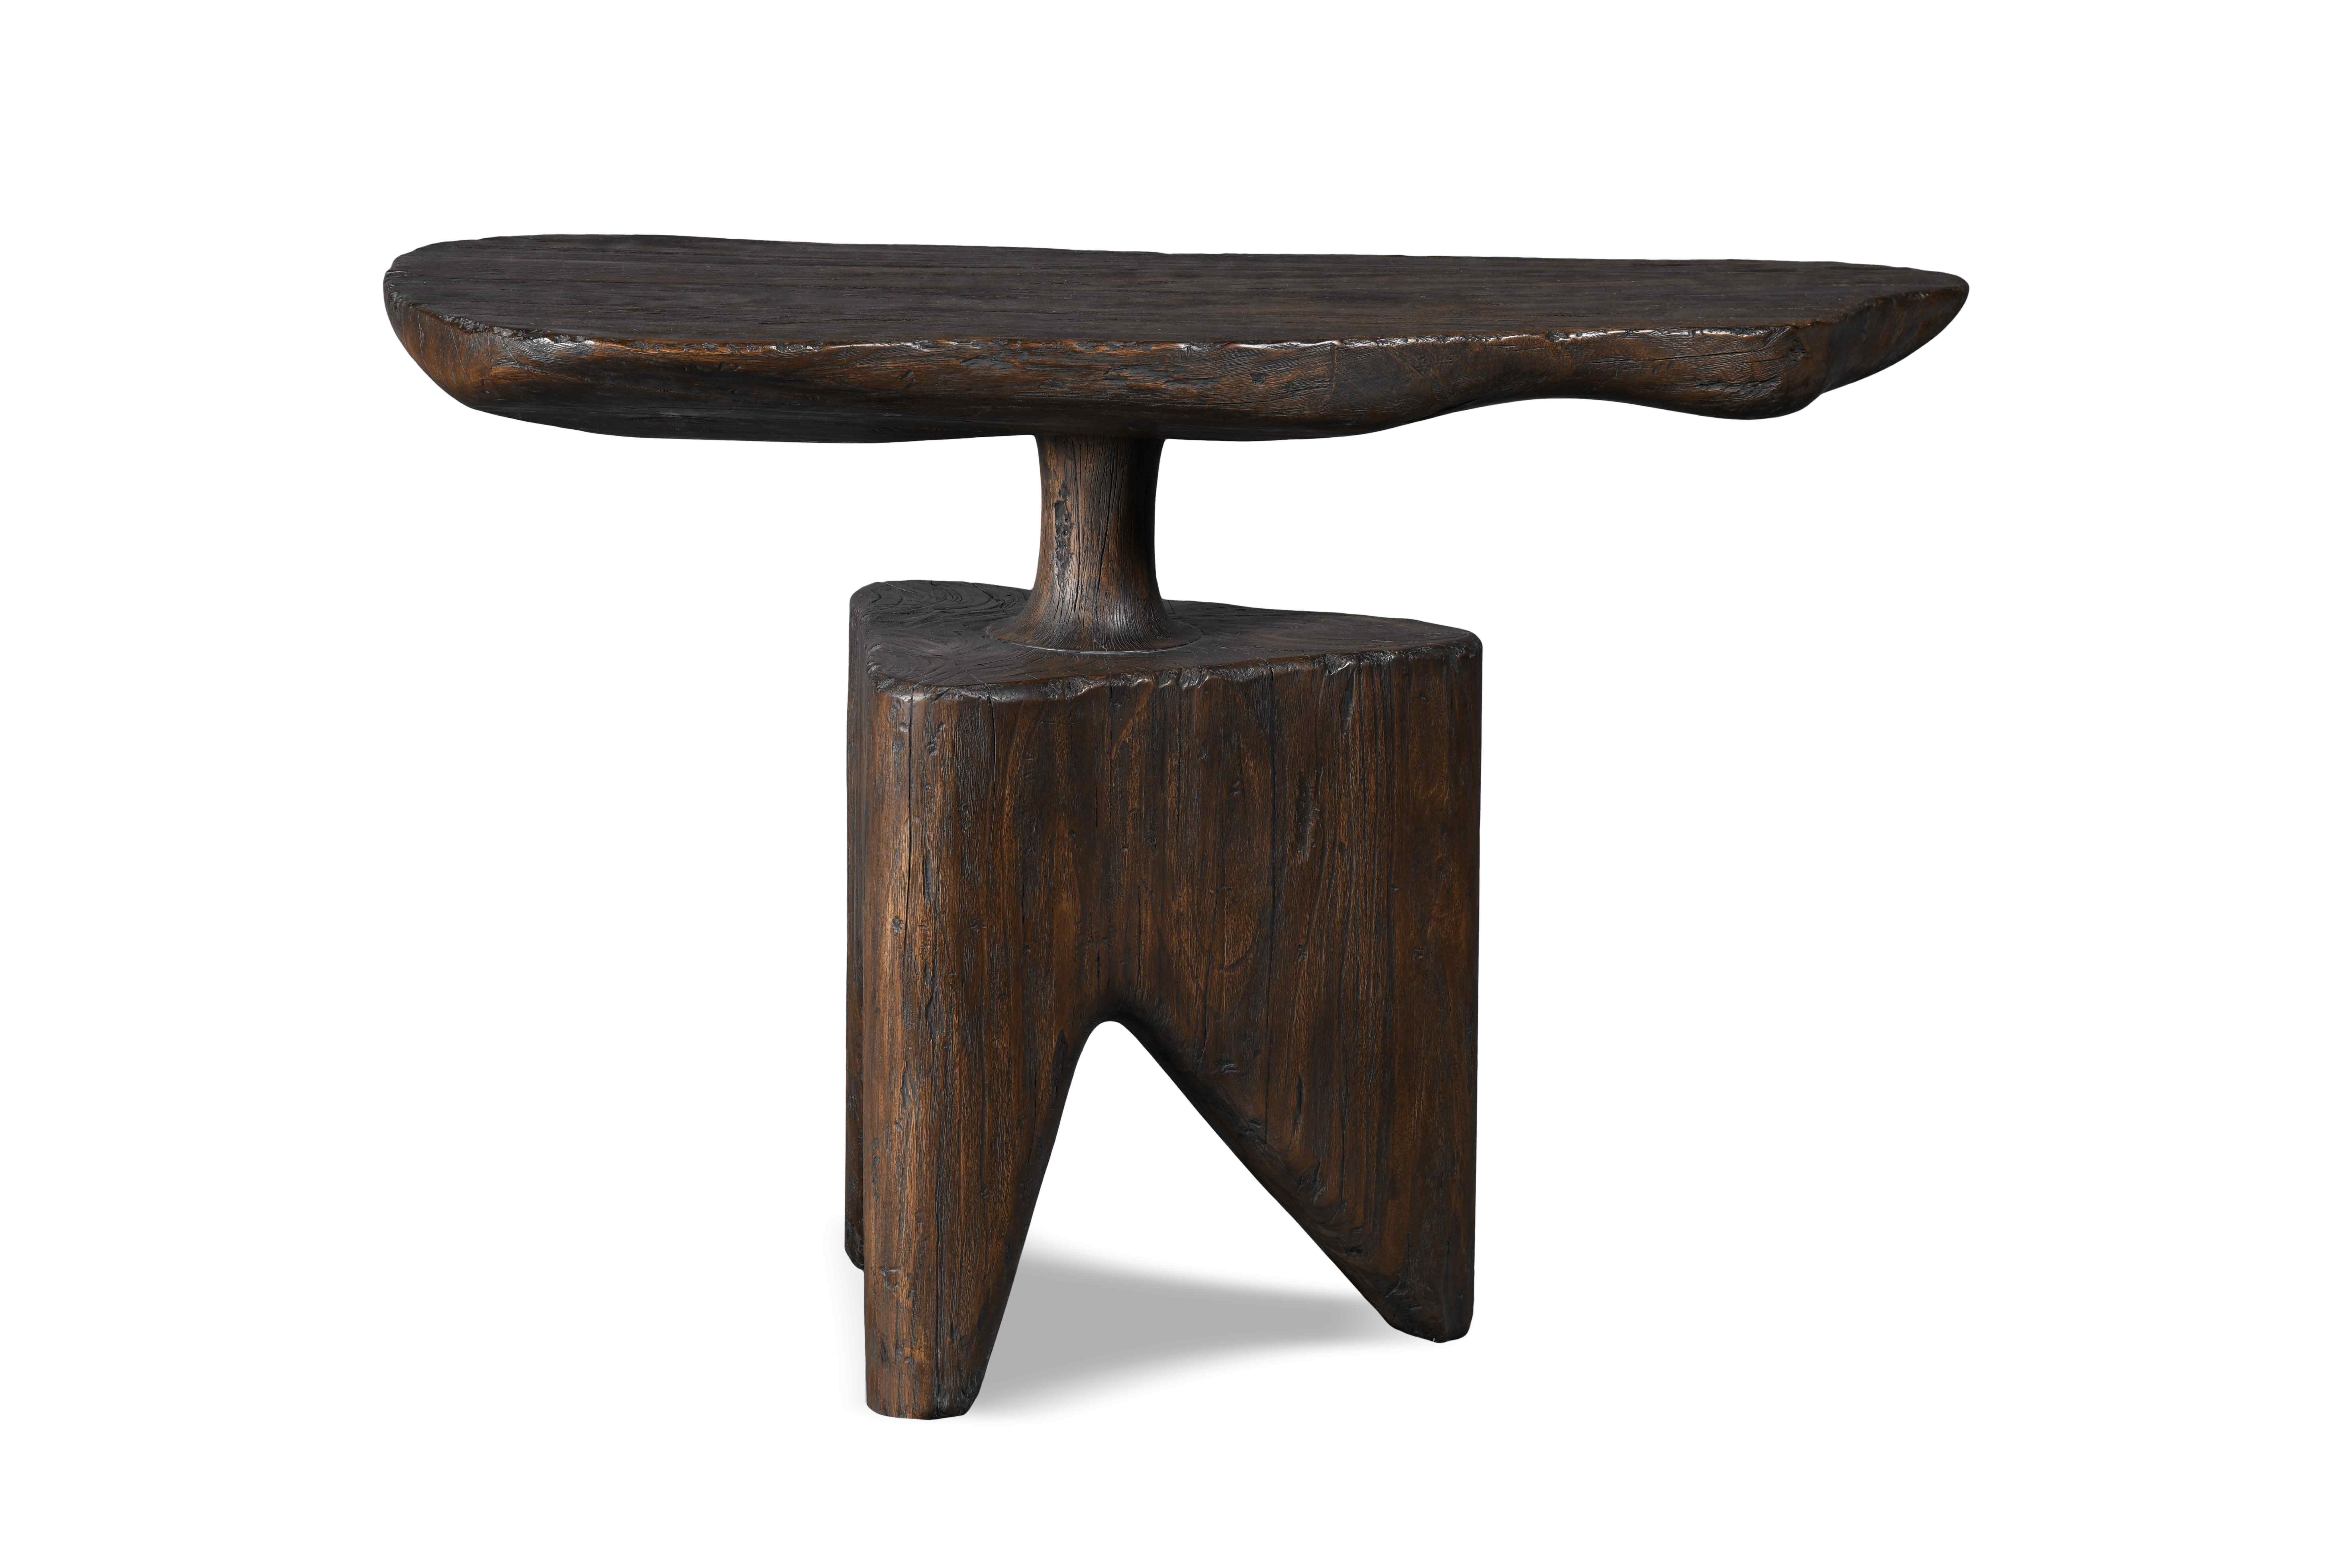 This console is eclectic in essence. Its irregularly formed base and three standing legs make it visually appealing. Its finish is rustic and sophisticated achieving an aged esthetic perfect for decorating any space.